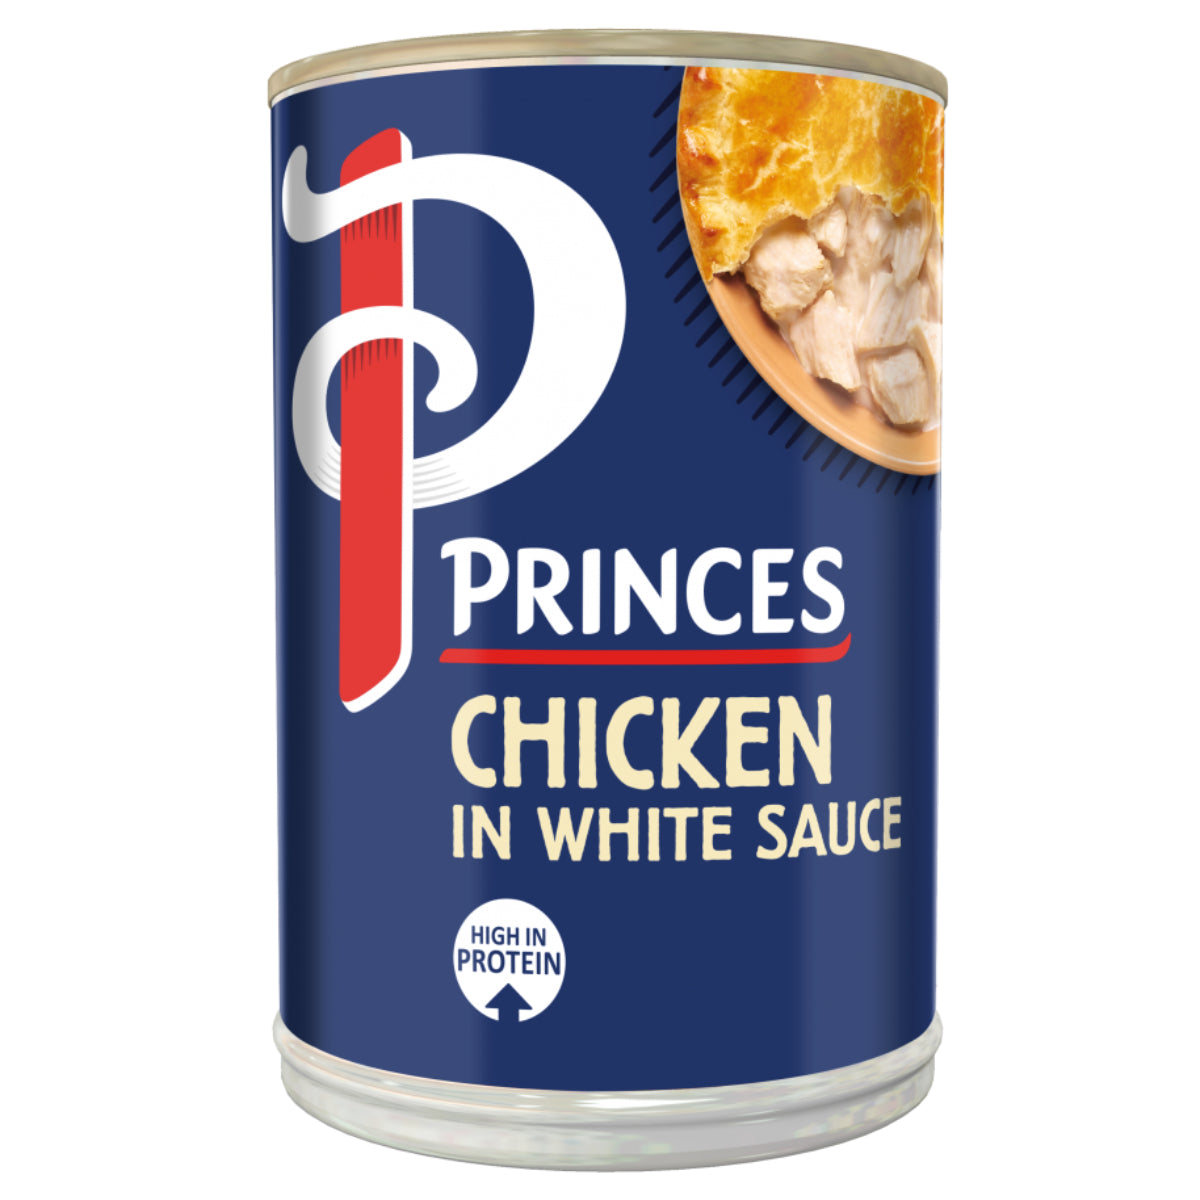 Princes - Chicken in White Sauce - 392g - Continental Food Store